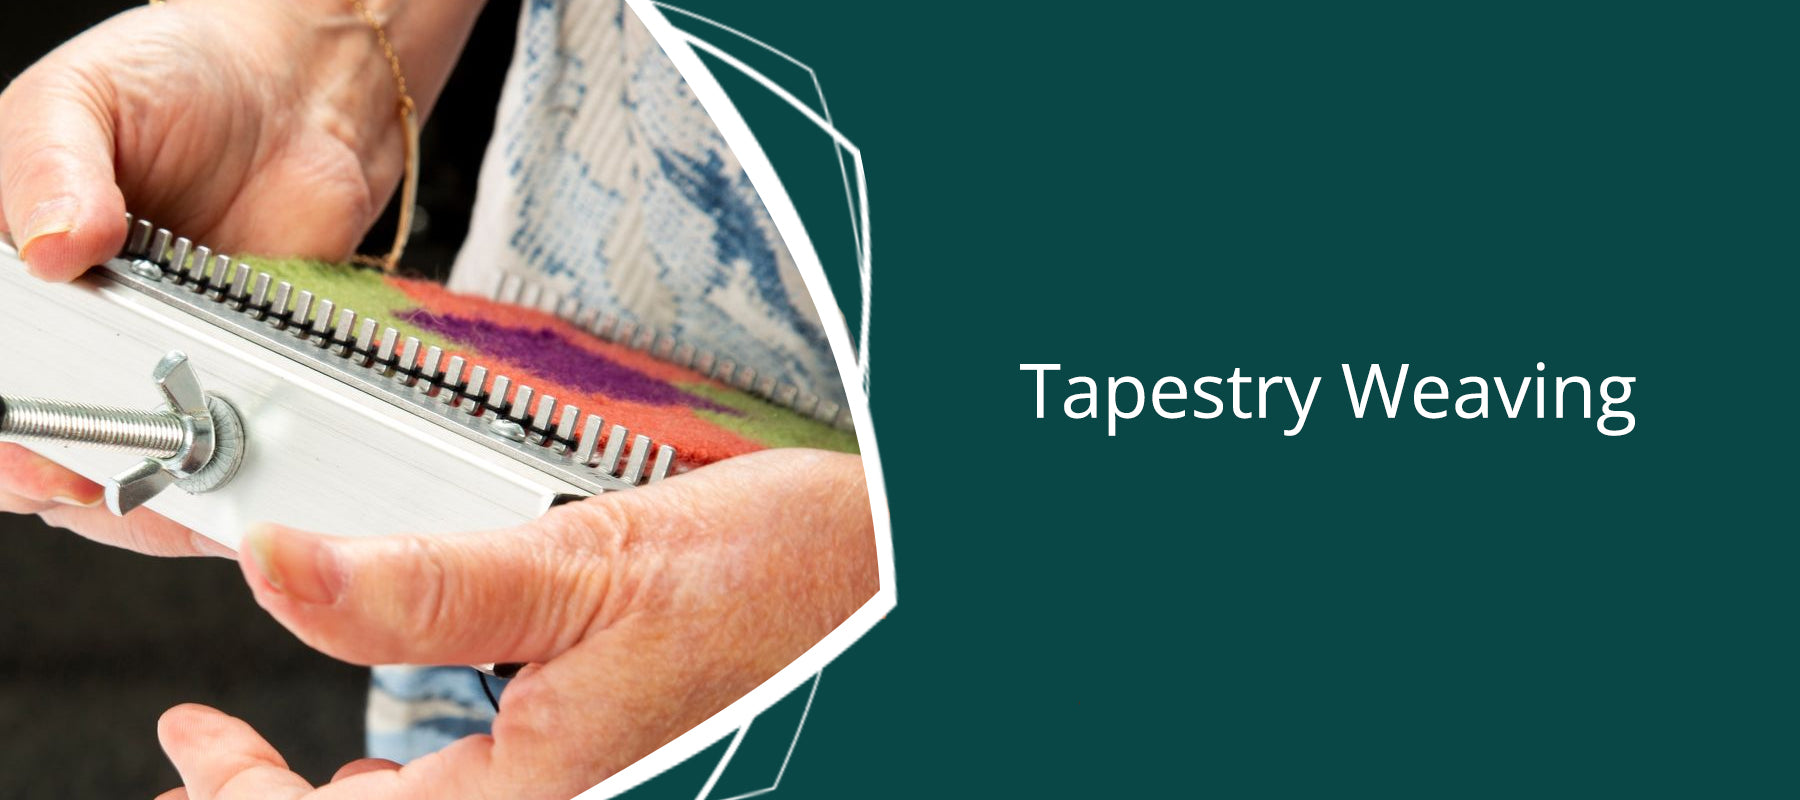 Tapestry weaving supplies and looms - Thread Collective Australia 